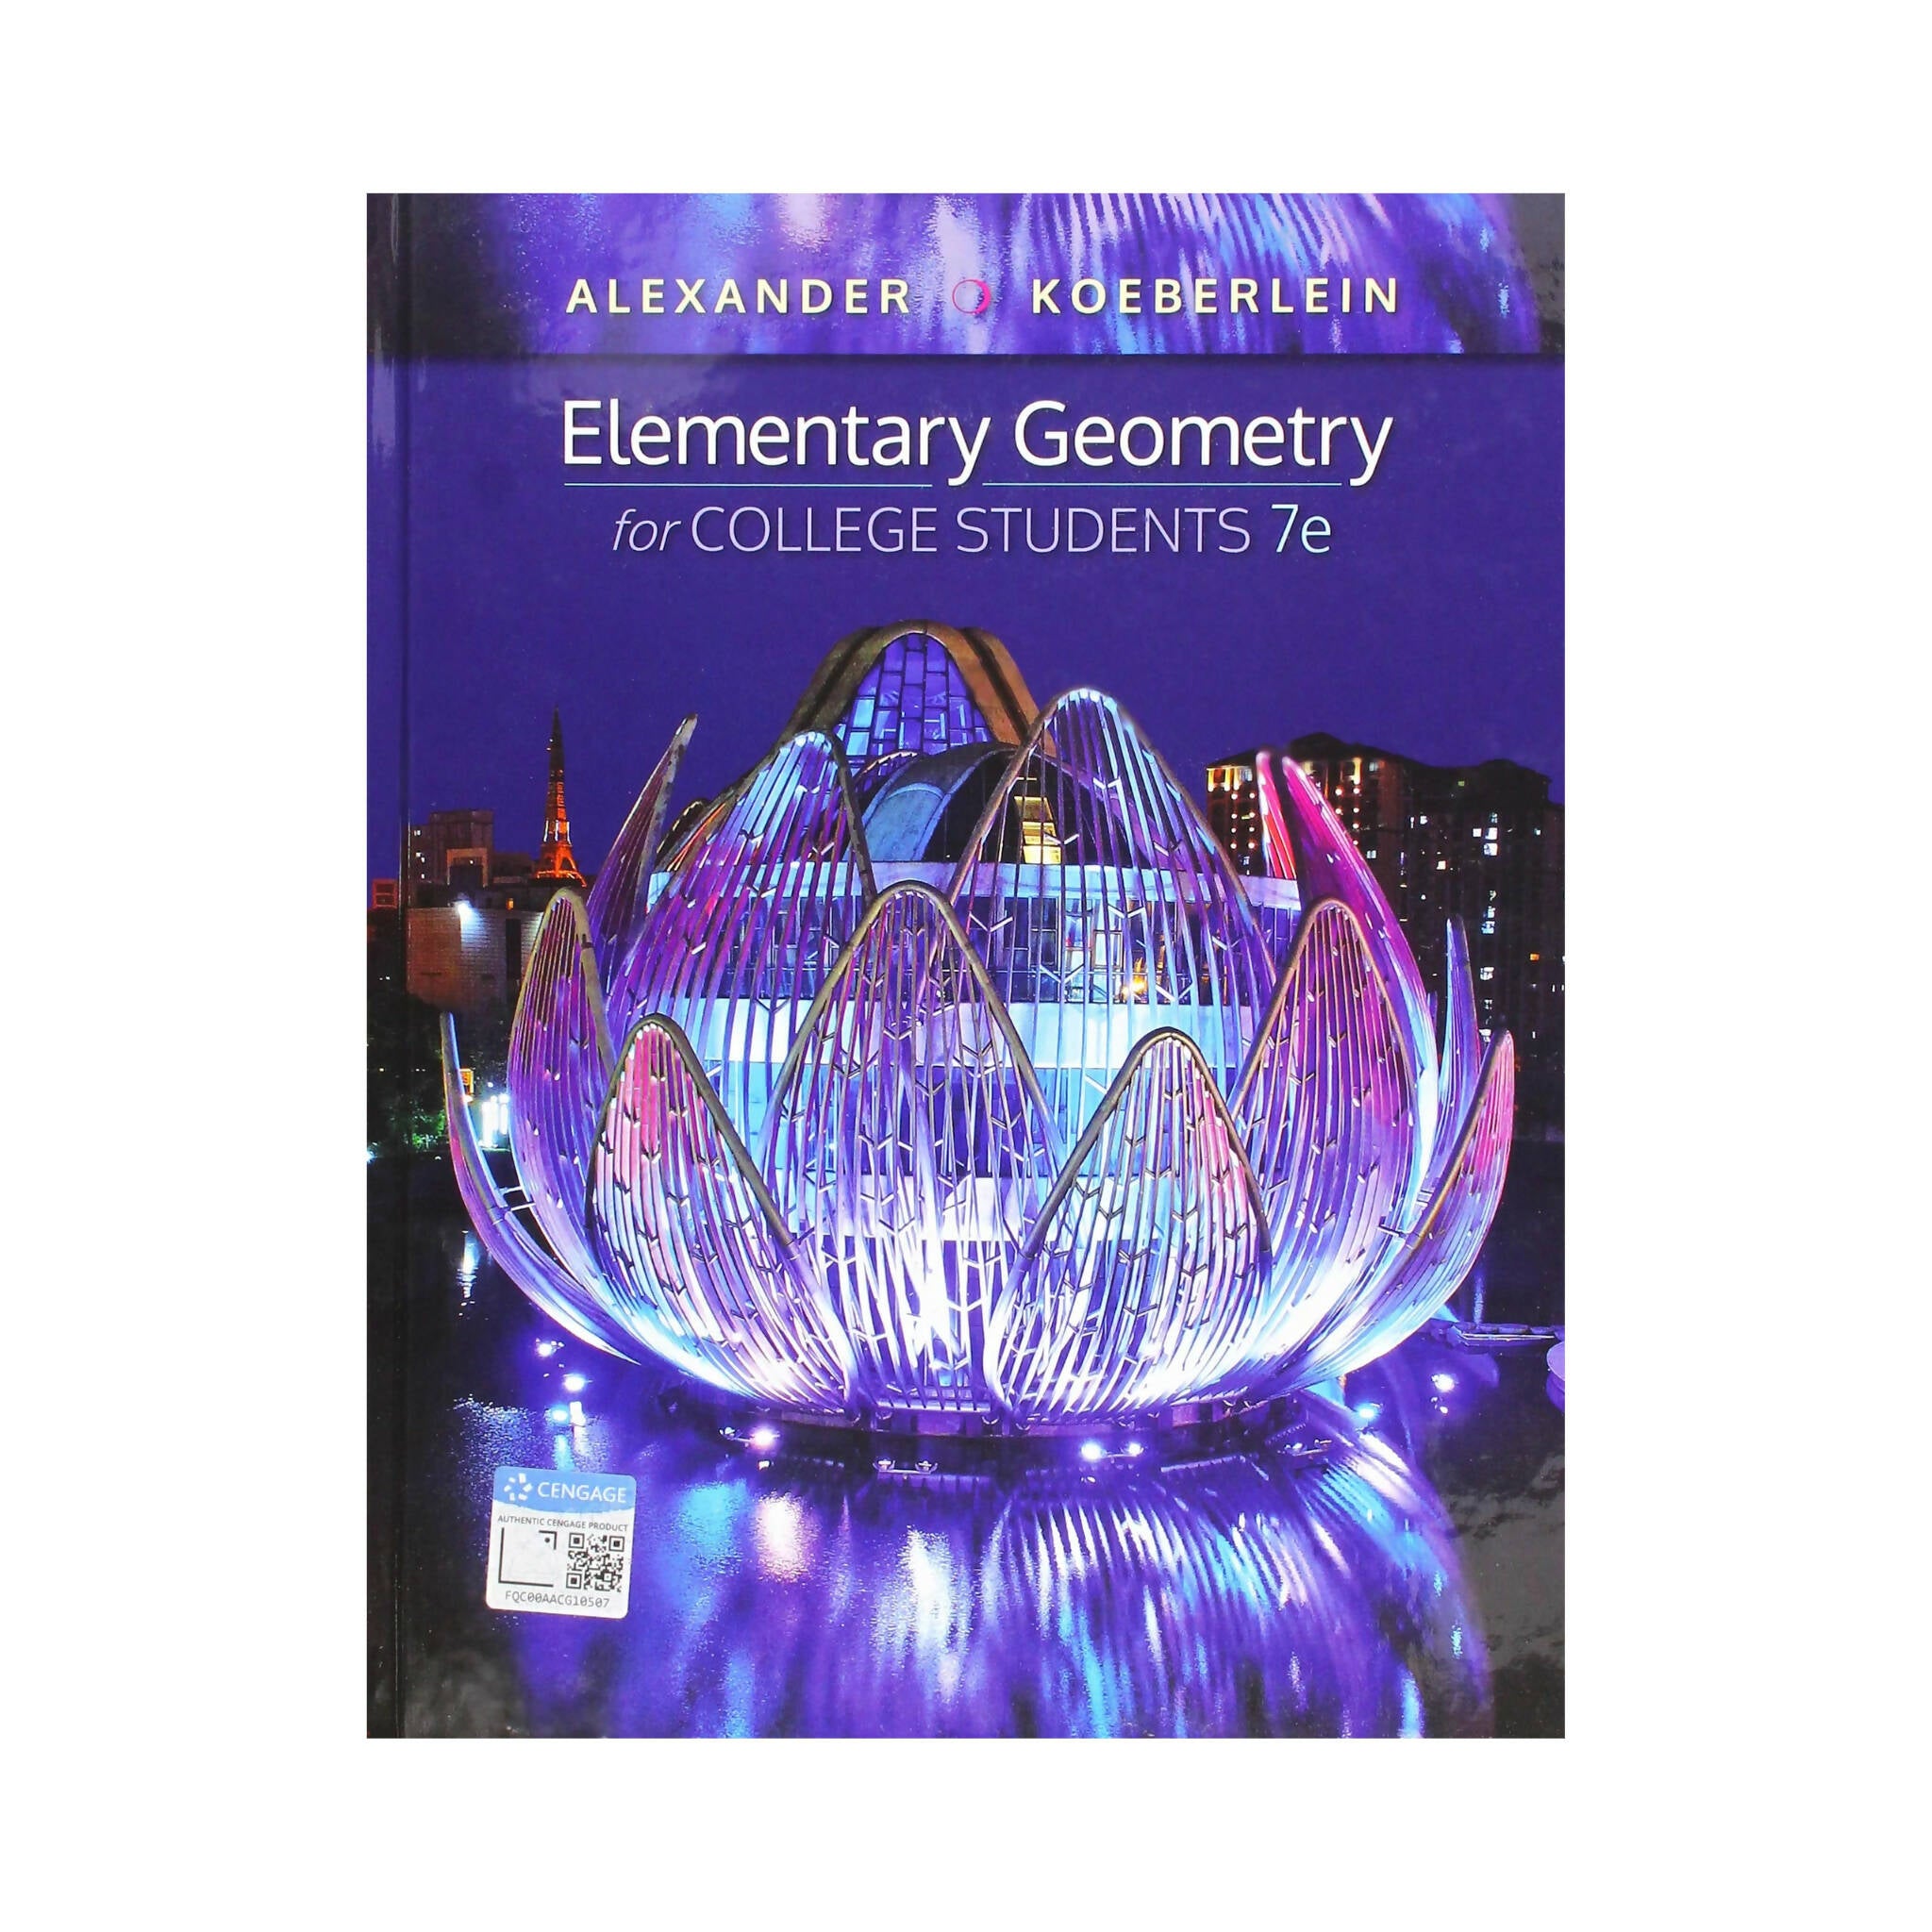 Book, Elementary Geometry for College Students